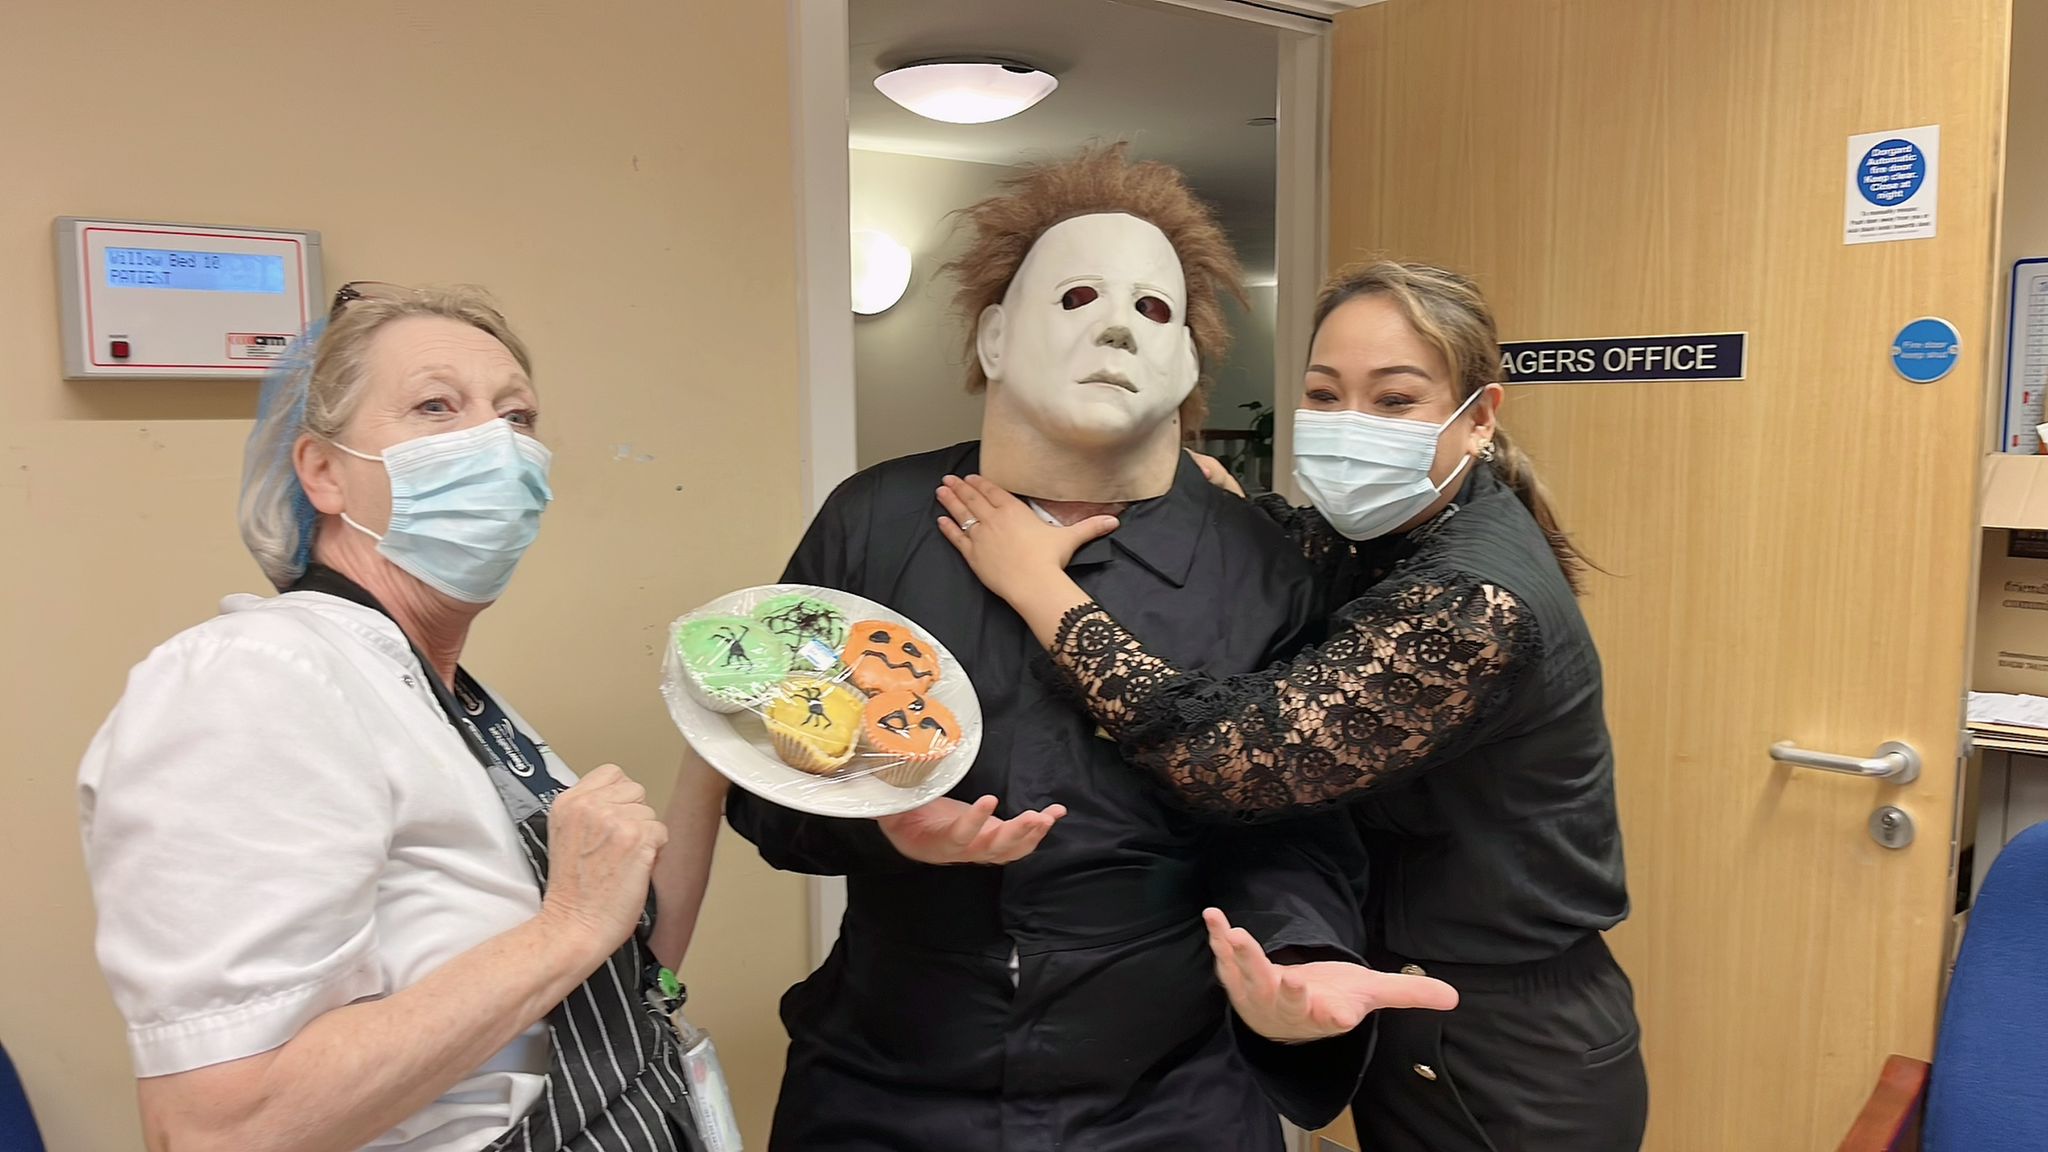 Manager and other employees with Michael Myers 